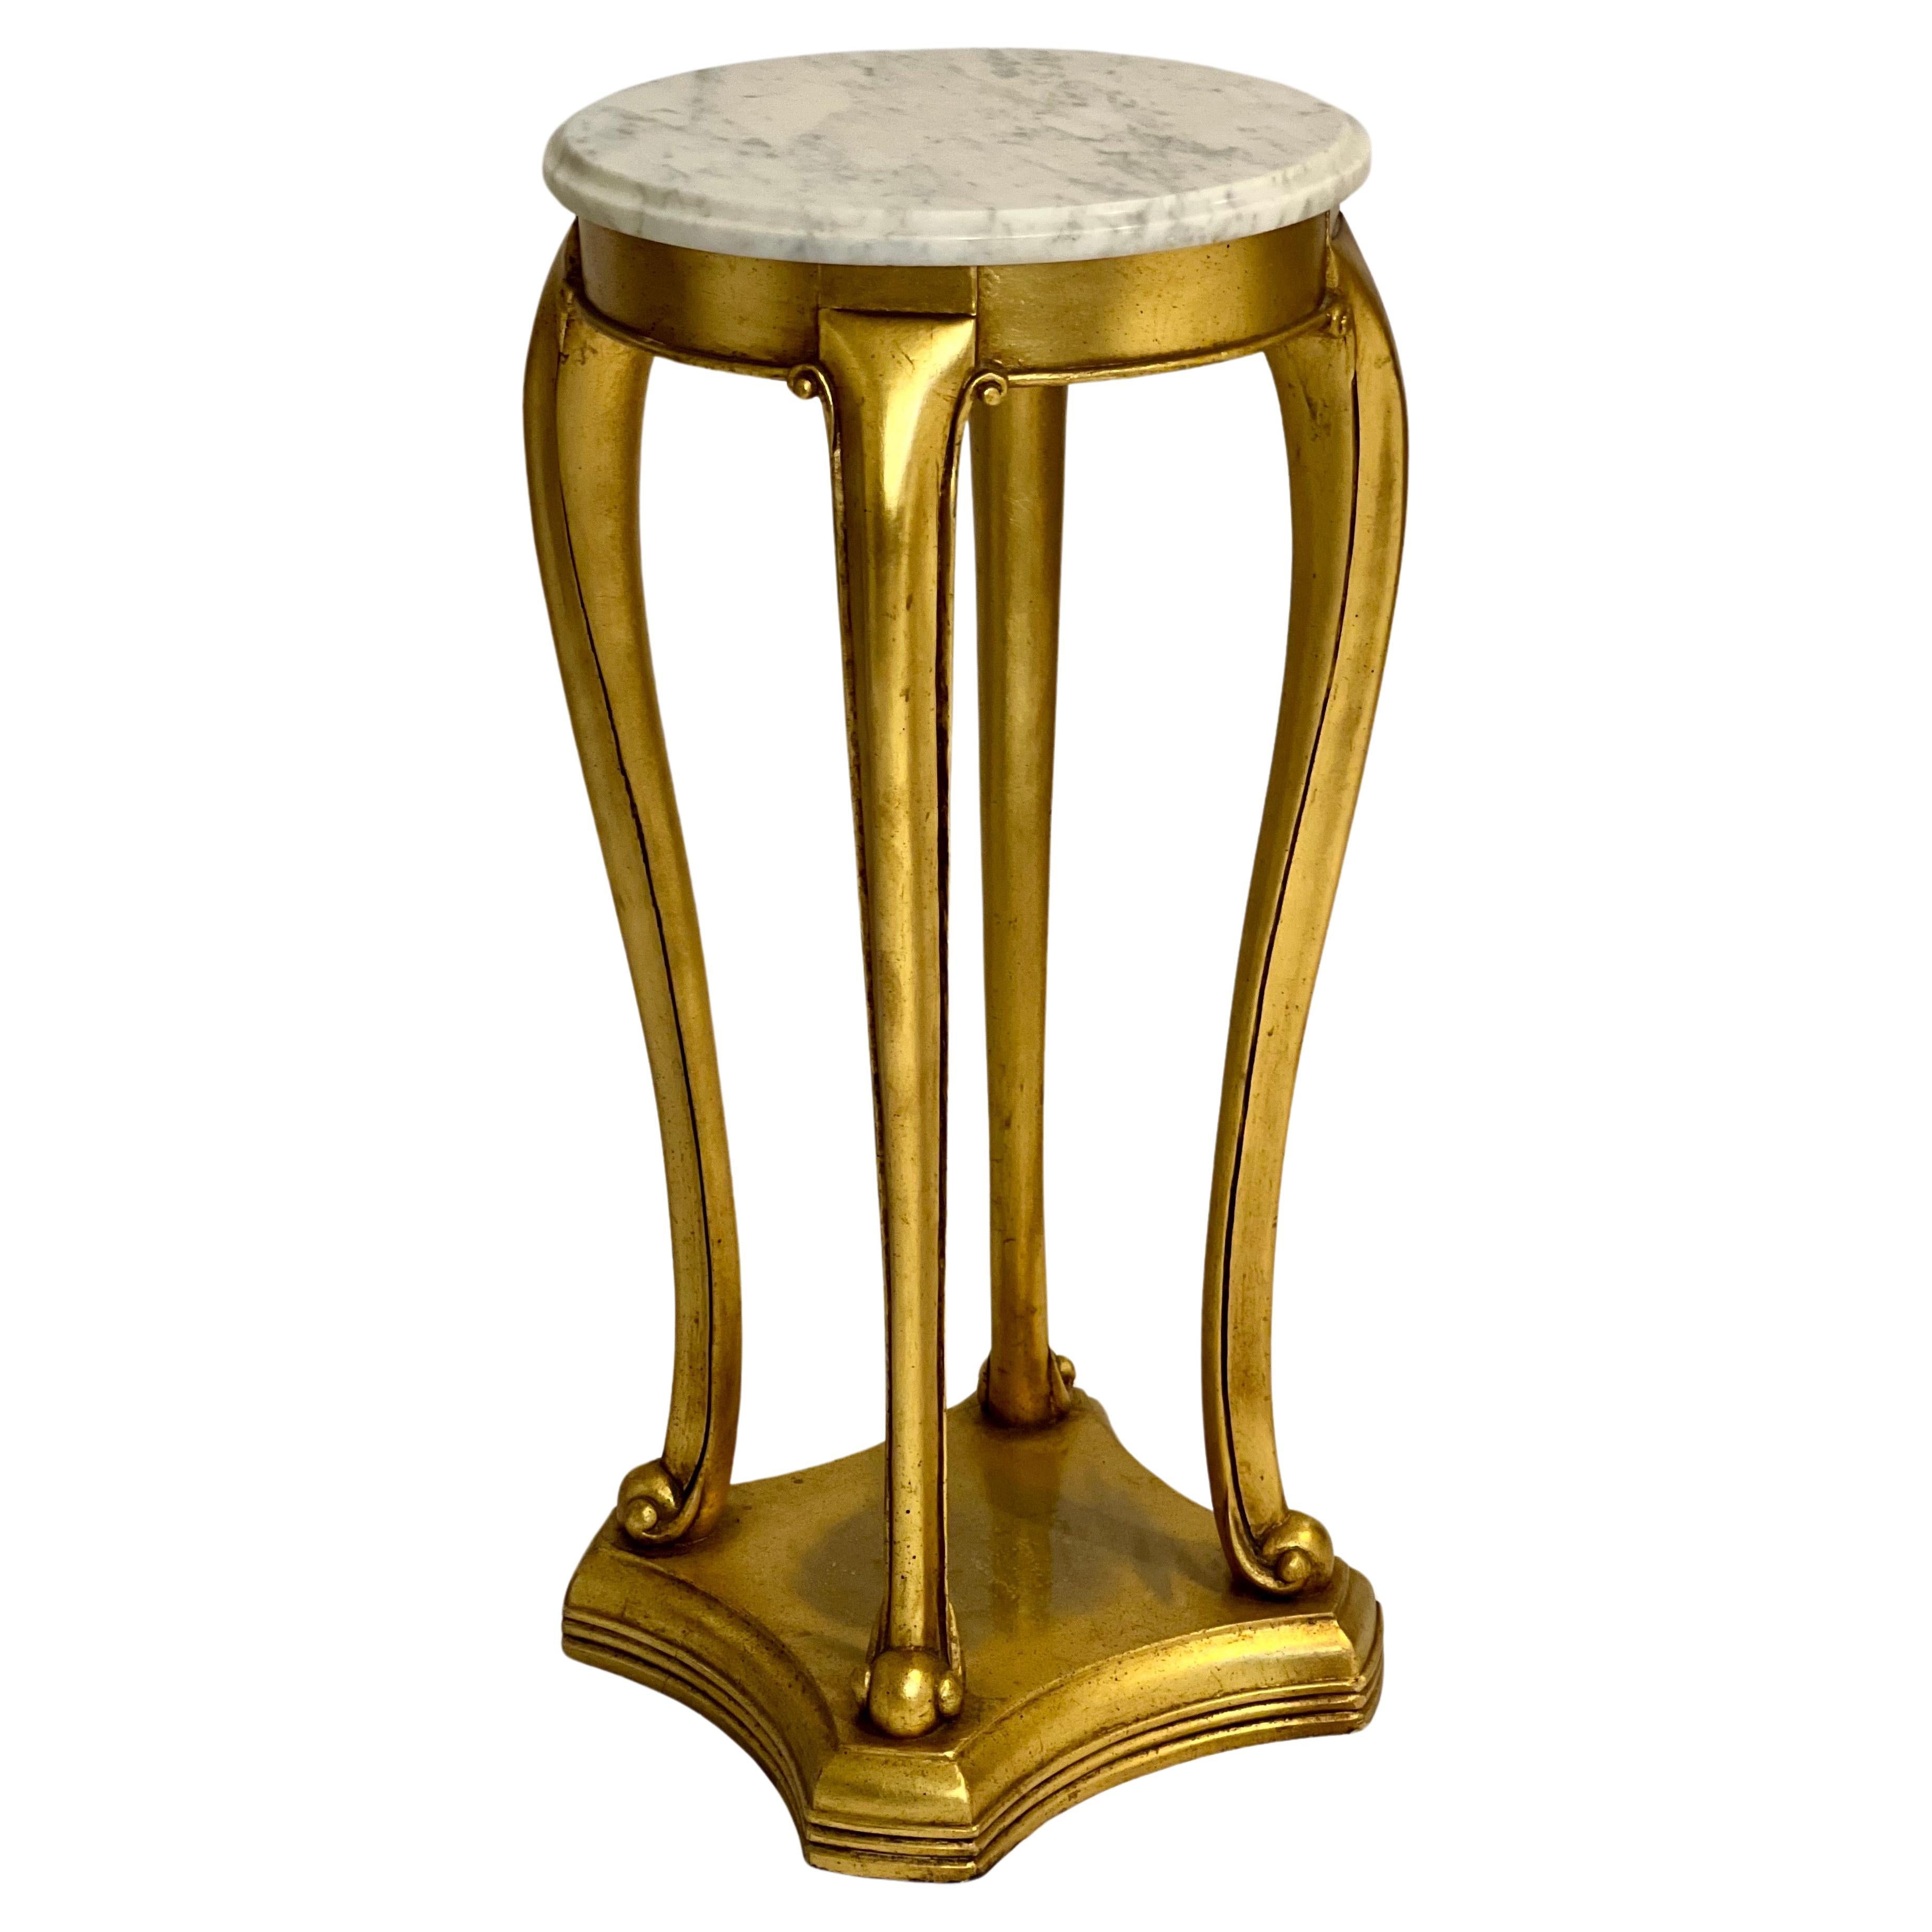 19th Century Regency Style Gilt Wood Marble Top Pedestal or Plant Stand